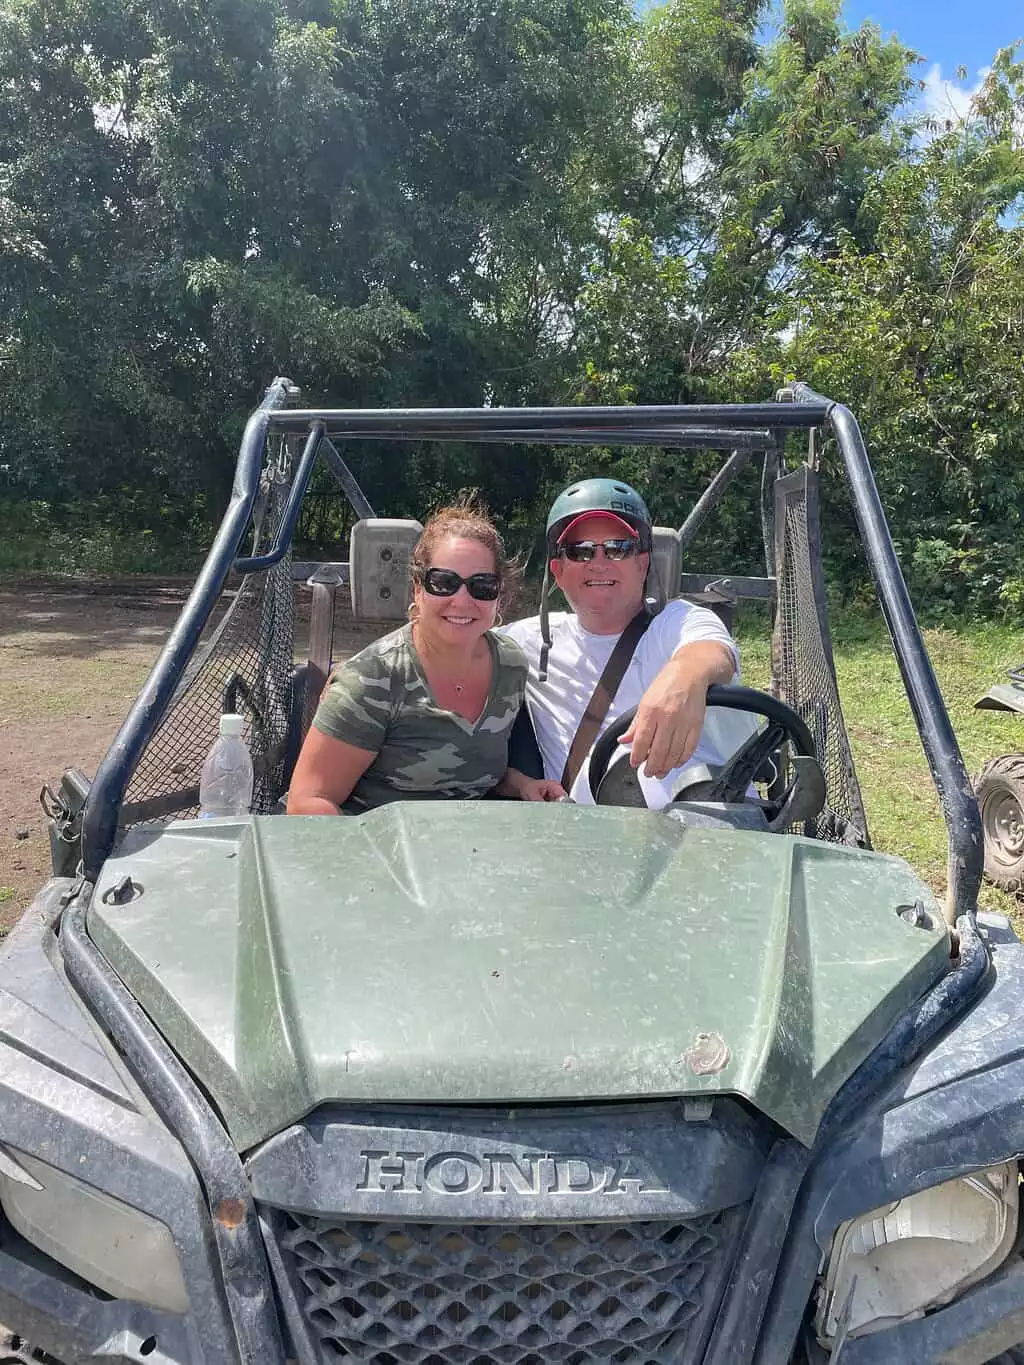 St. Kitts Buggy Adventure Off-road/Rain forest style